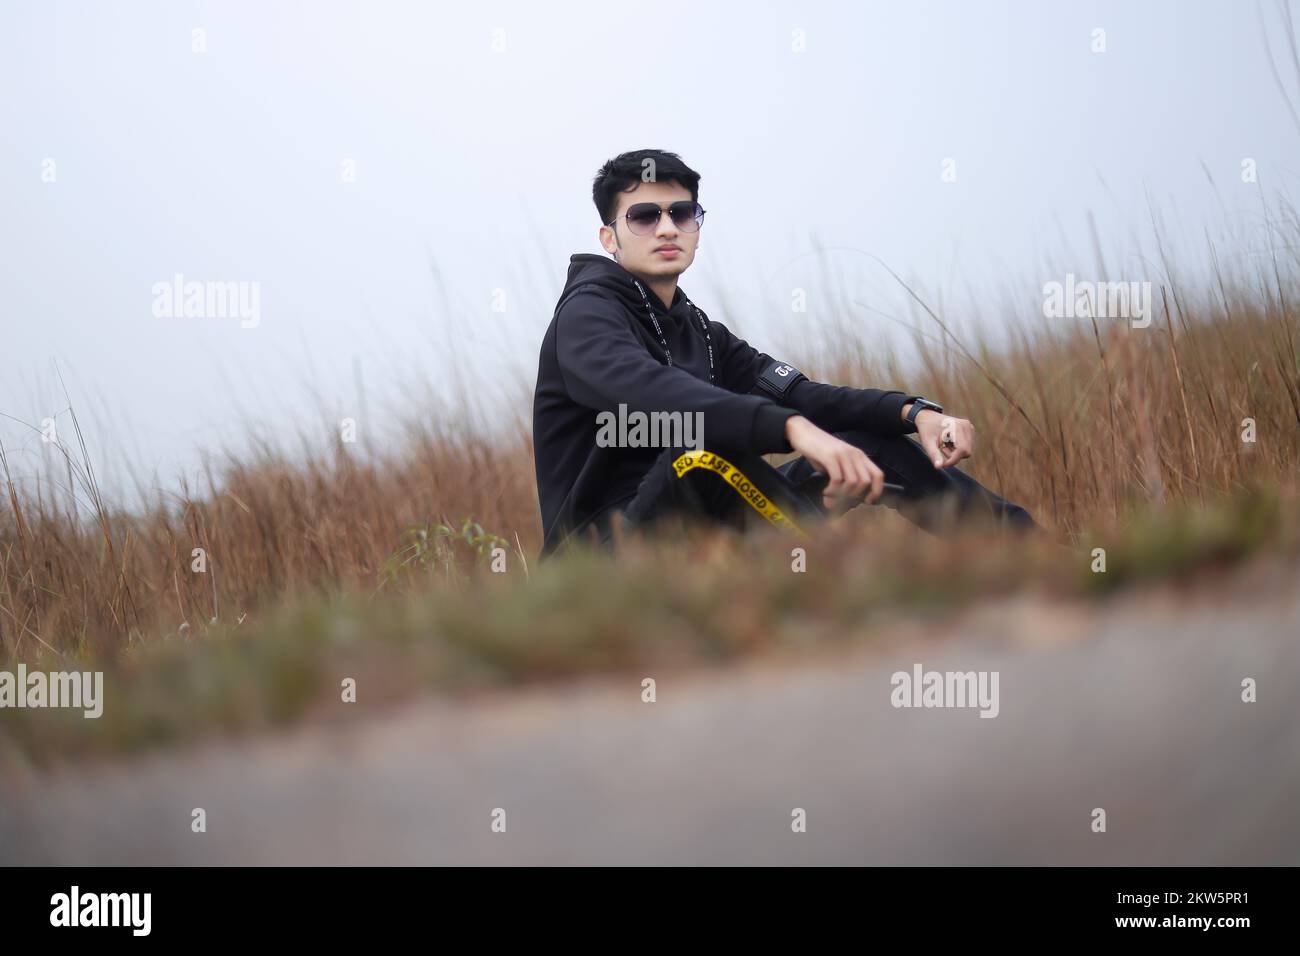 500+ Boy Winter Images, Stock Photos & Vectors 2023 | Handsome Boy Winter Pose Free Stock Images Download on Alamy | Perfect Winter Pose Images Stock Photo